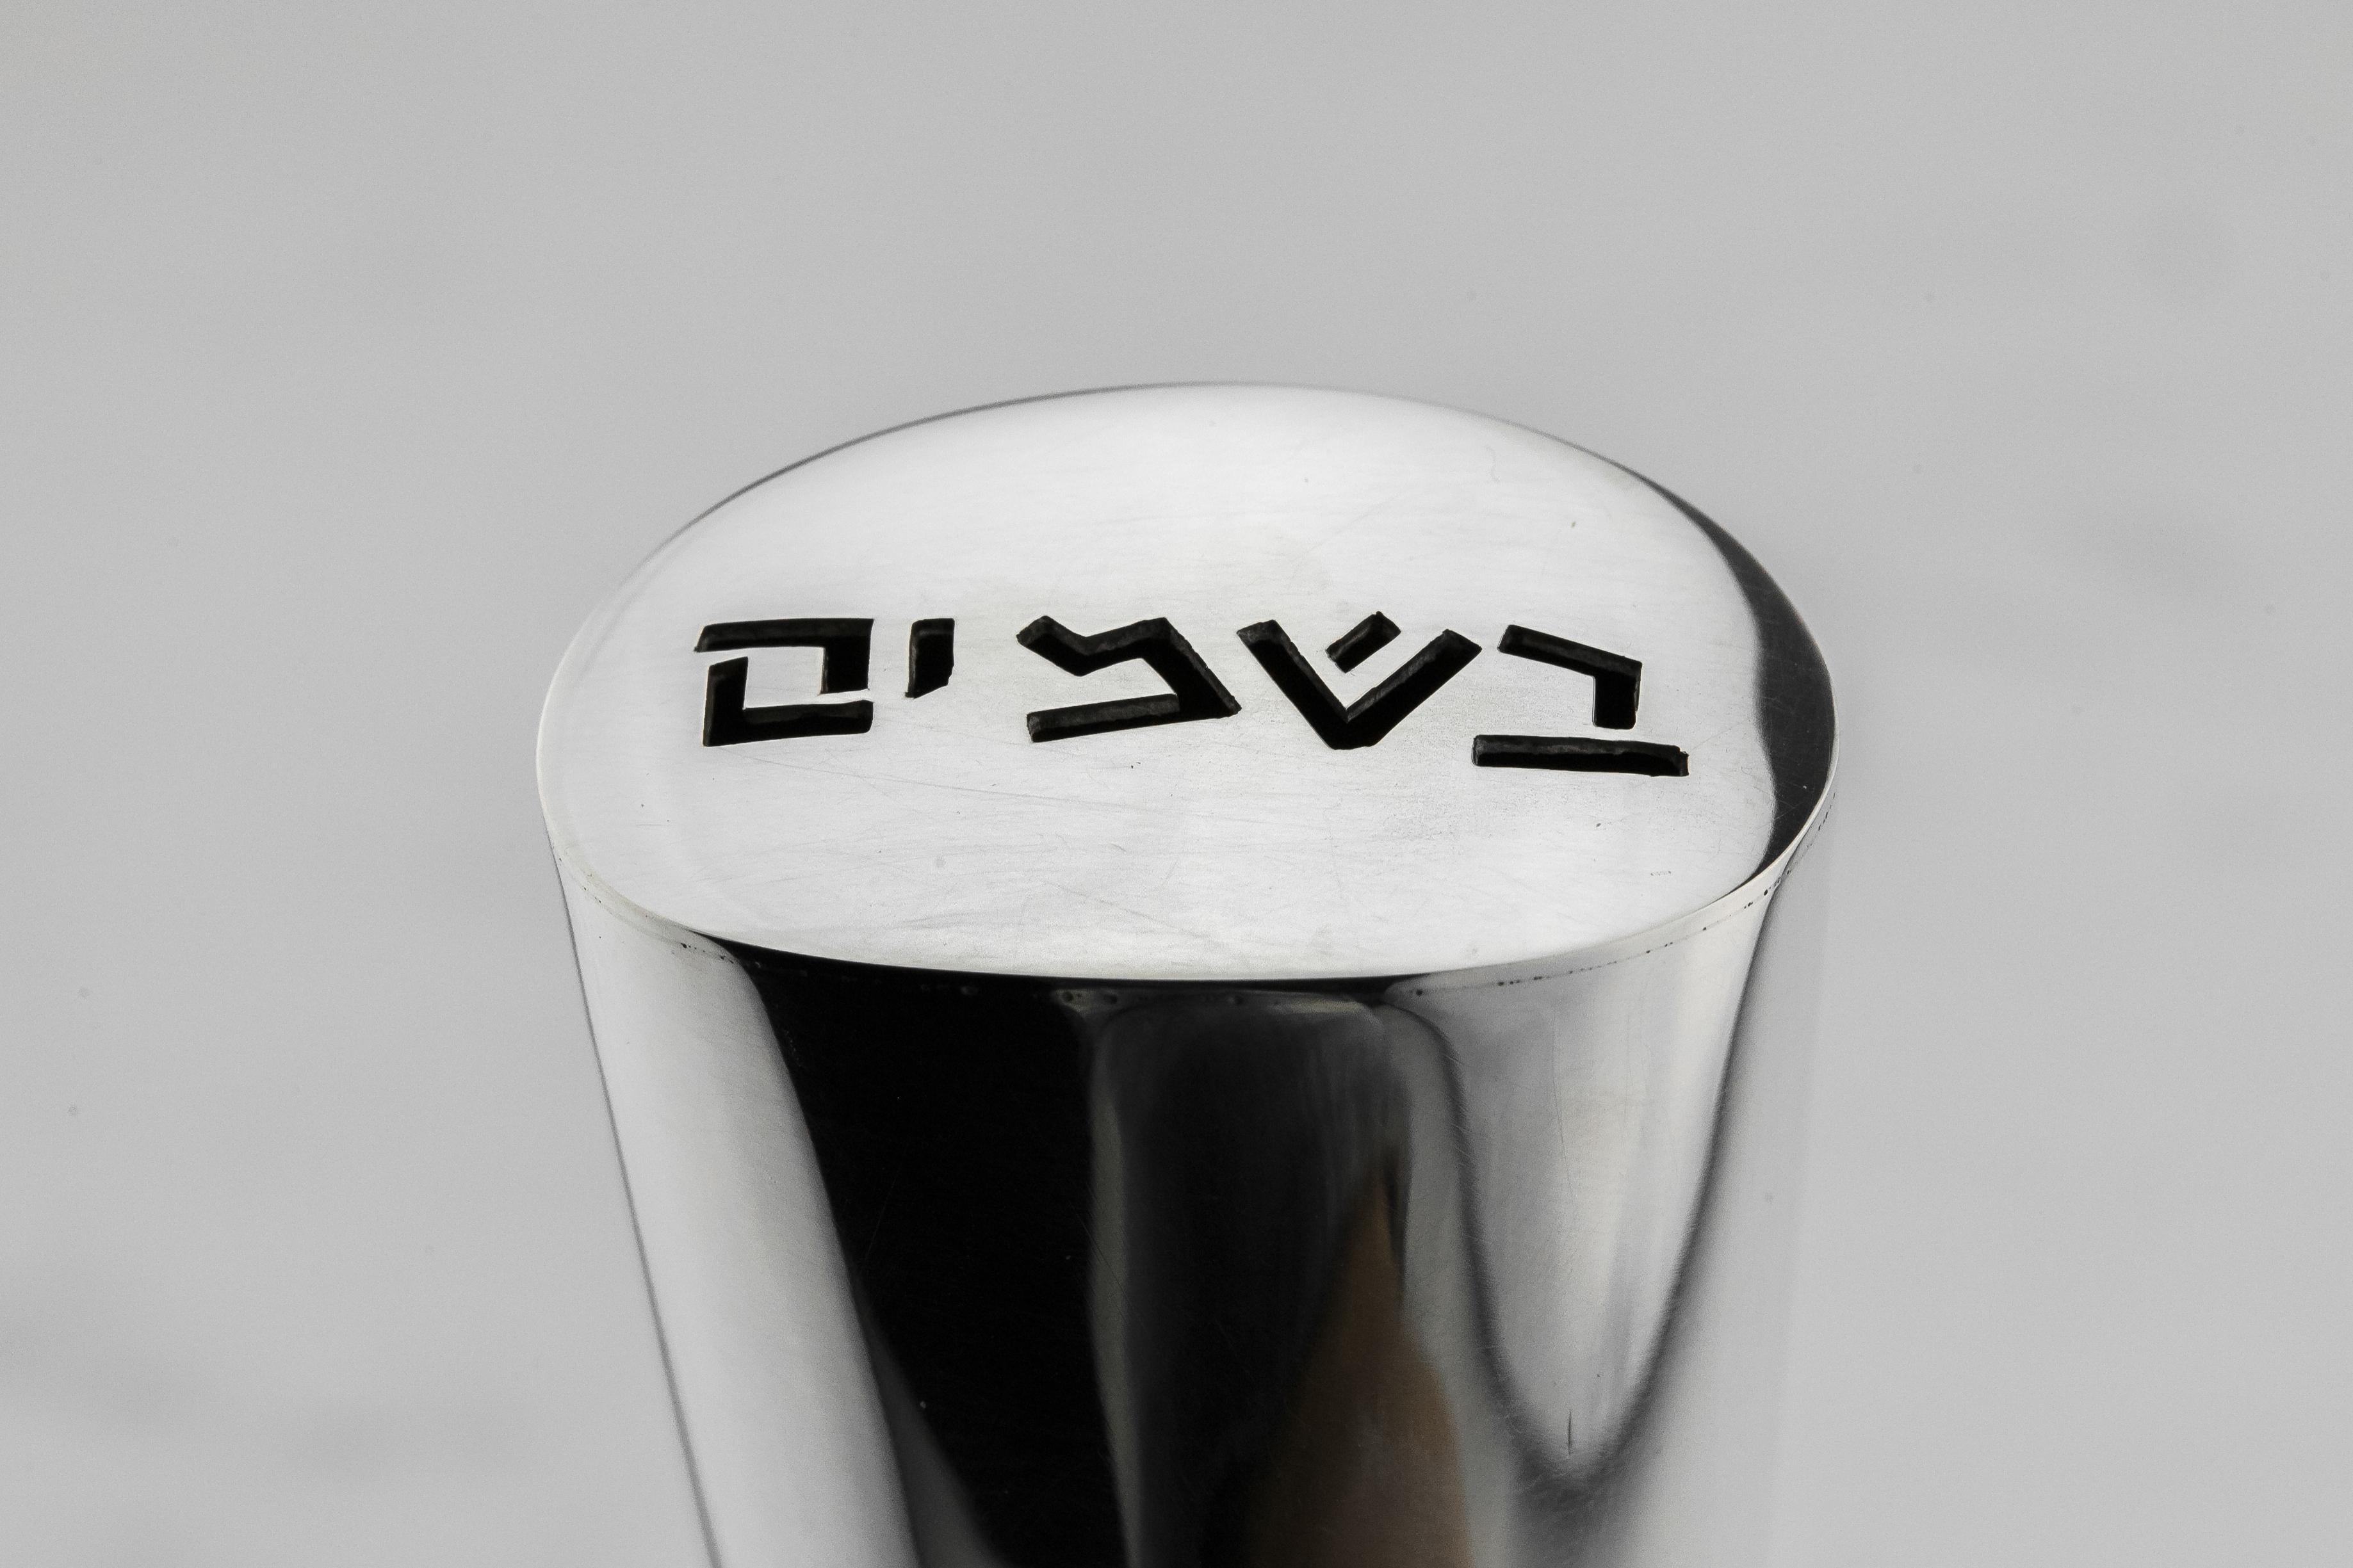 Modern sterling silver spice container by Moshe Zabari. New York, USA, circa 1968. Handcrafted in the Tobe Pascher Workshop. With the top pierced with the Hebrew word “Besamim” (spices) that opens when lifted. Marked with Moshe Zabari